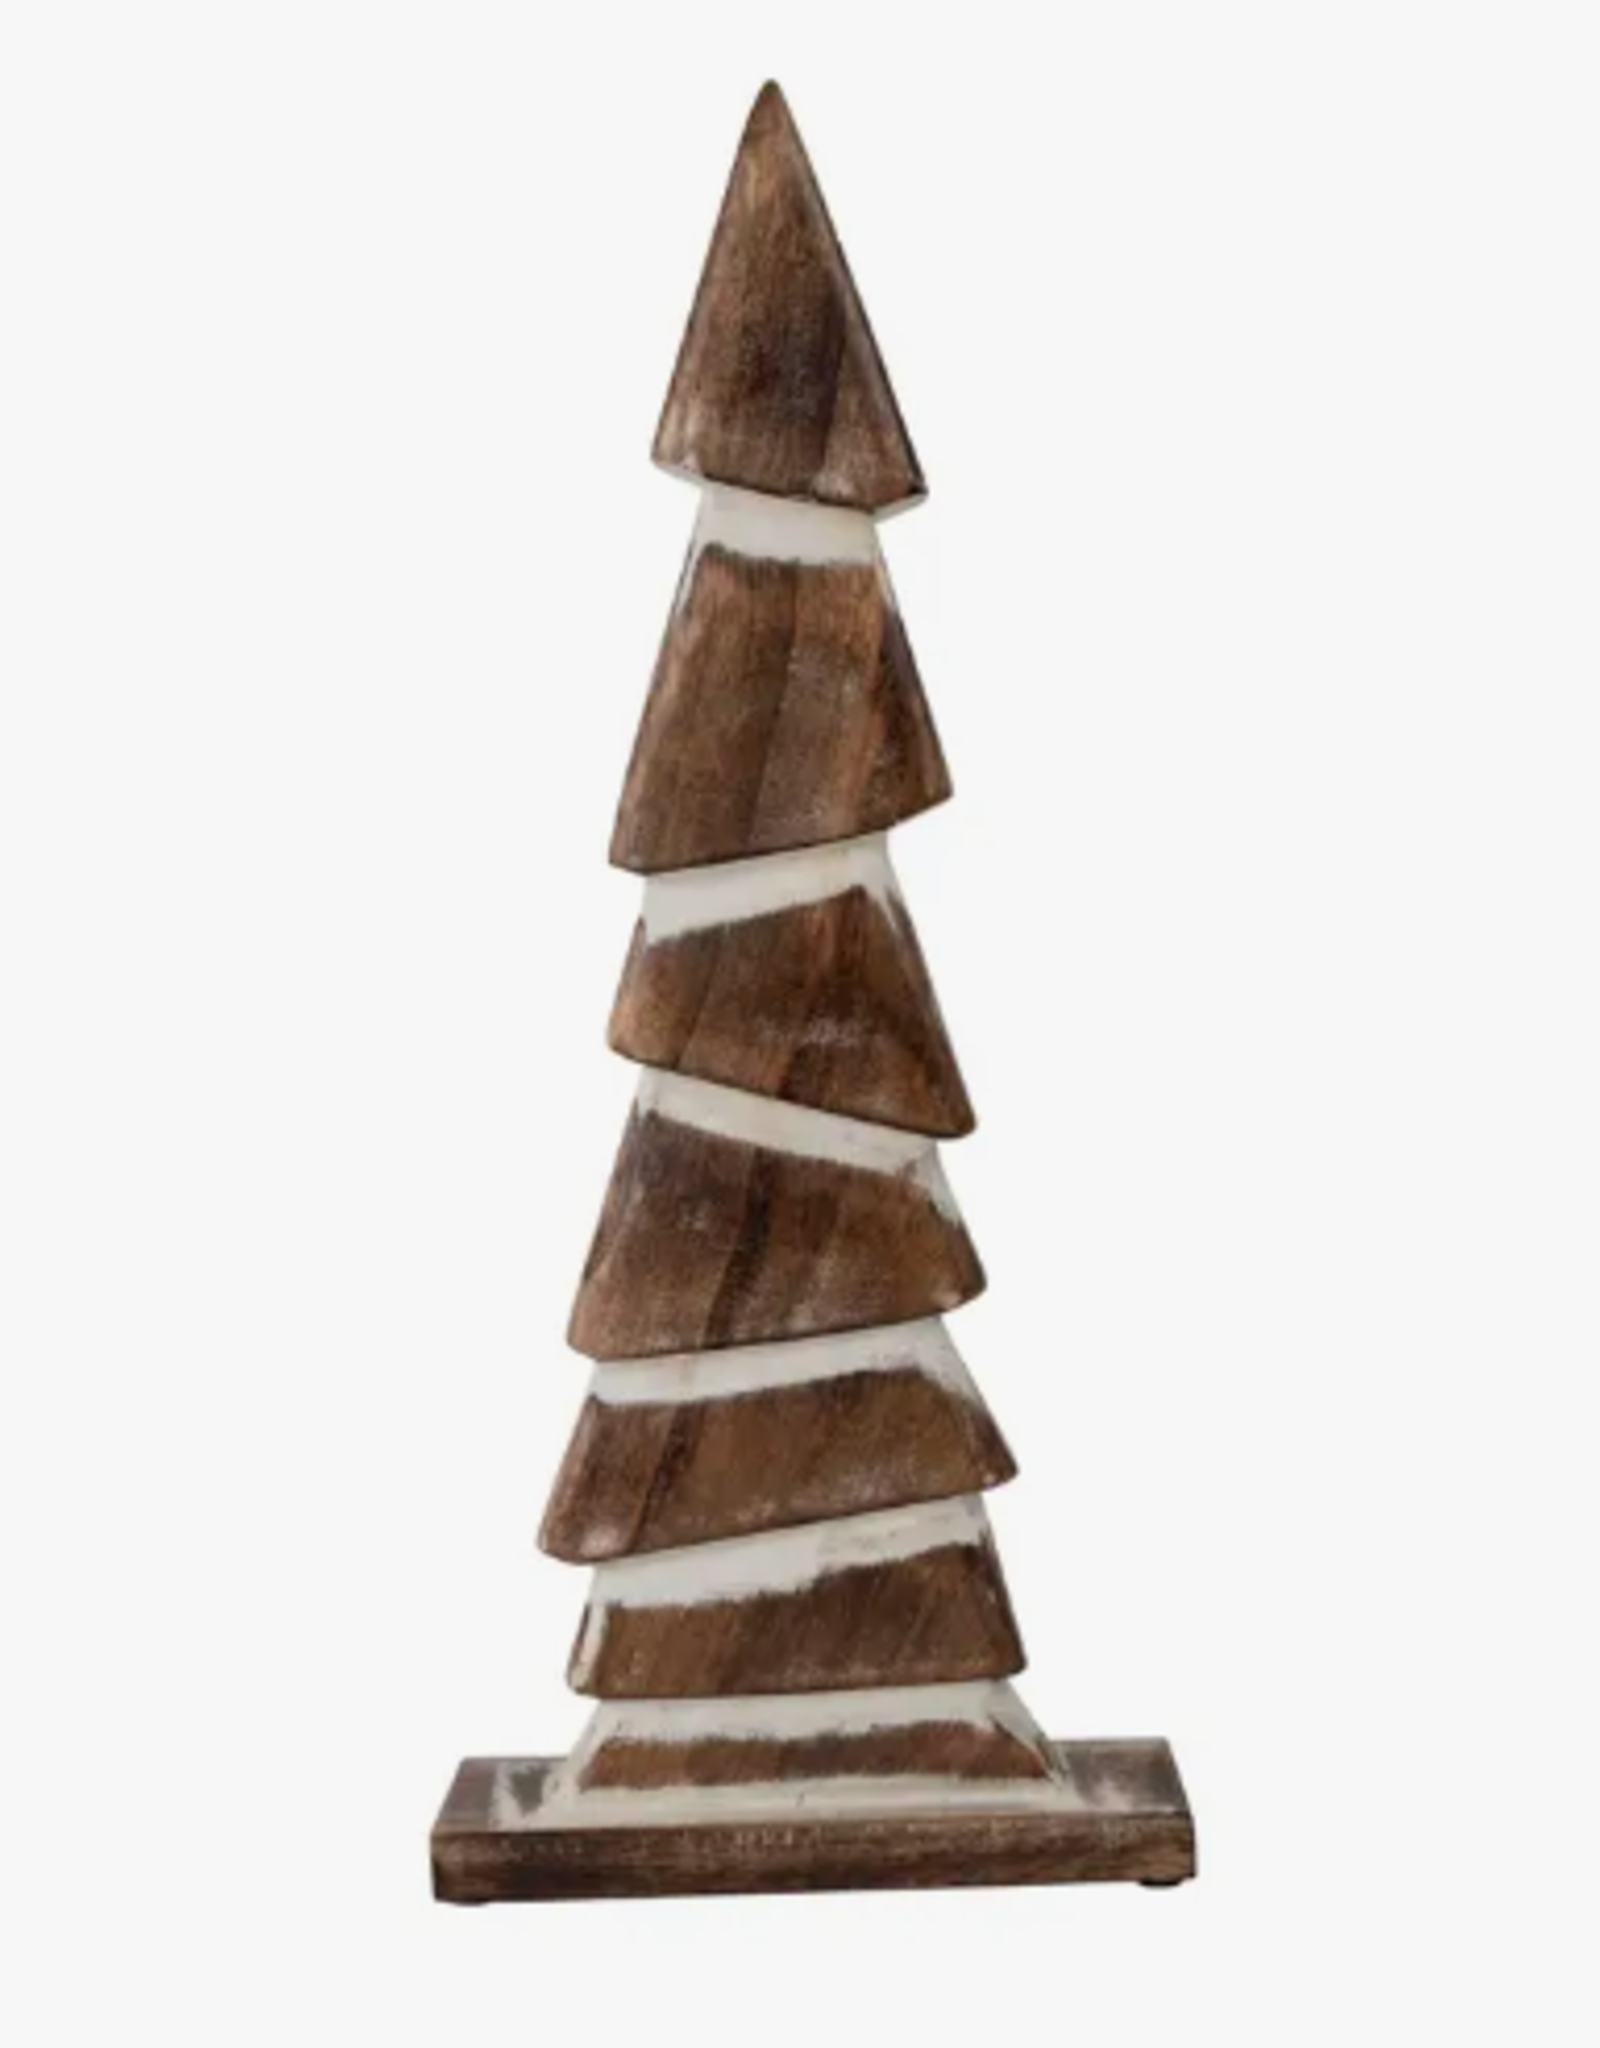 Ten Thousand Villages Handcarved Wood Winter Tree